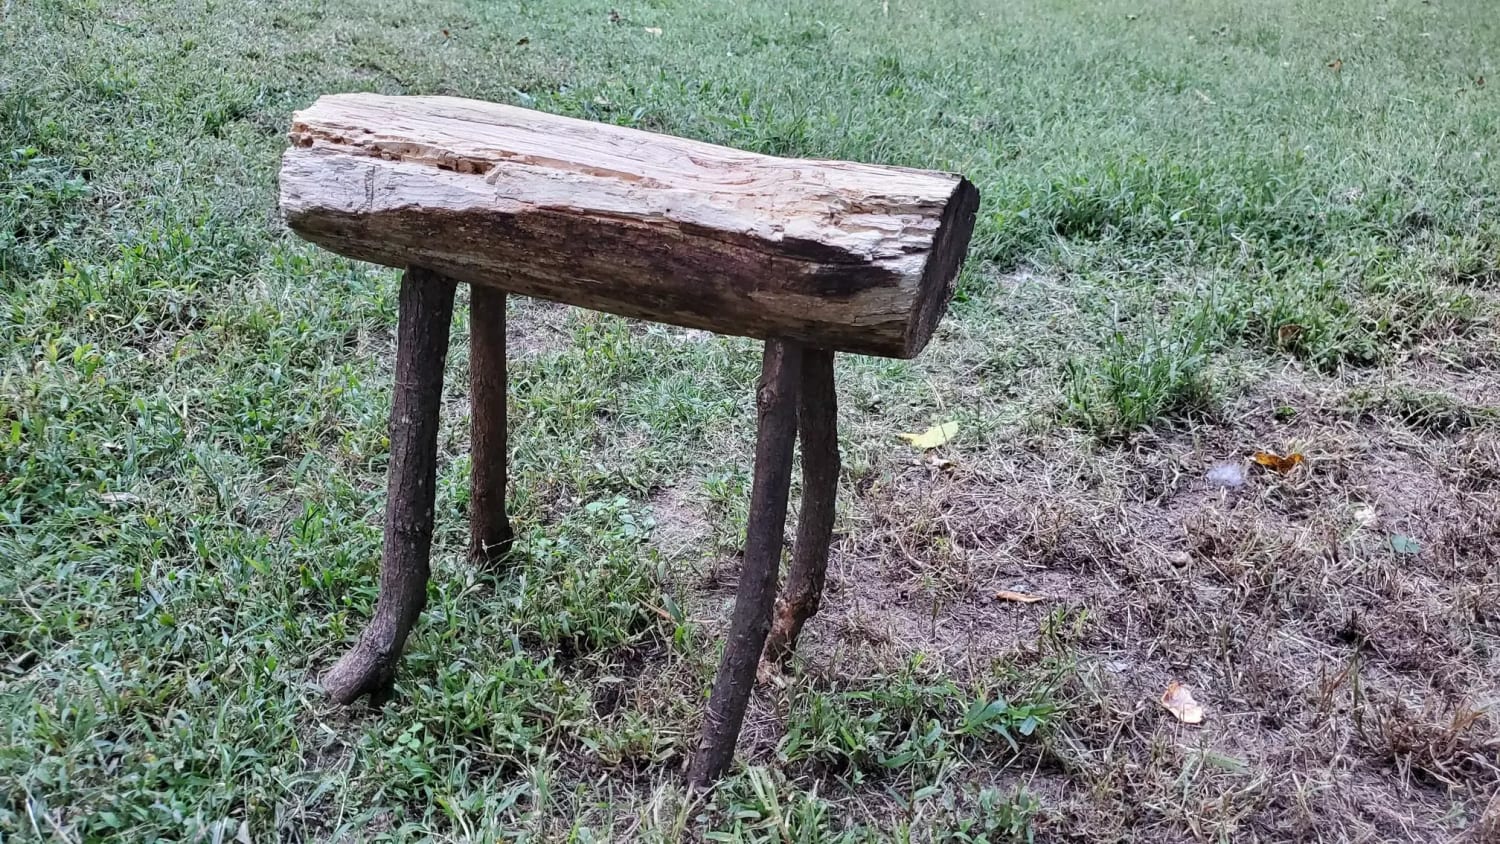 Made a simple stool with a scotch eye auger.